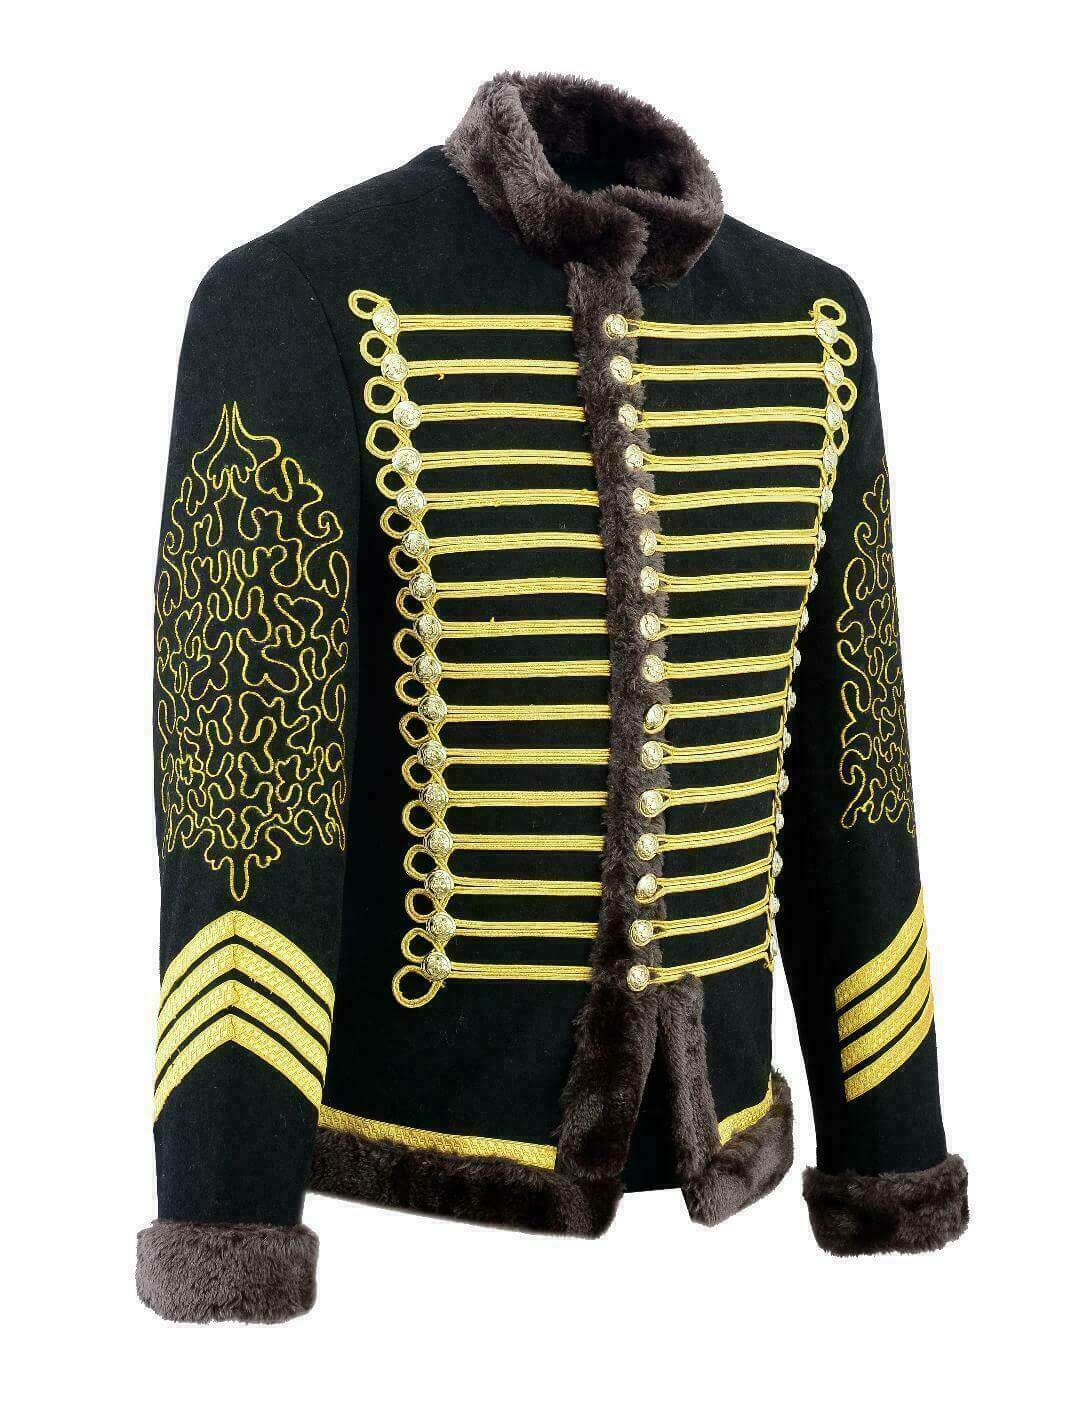 Hussar Jimi Hendrix Inspired Parade Jacket Military Drummer Jacket With ...